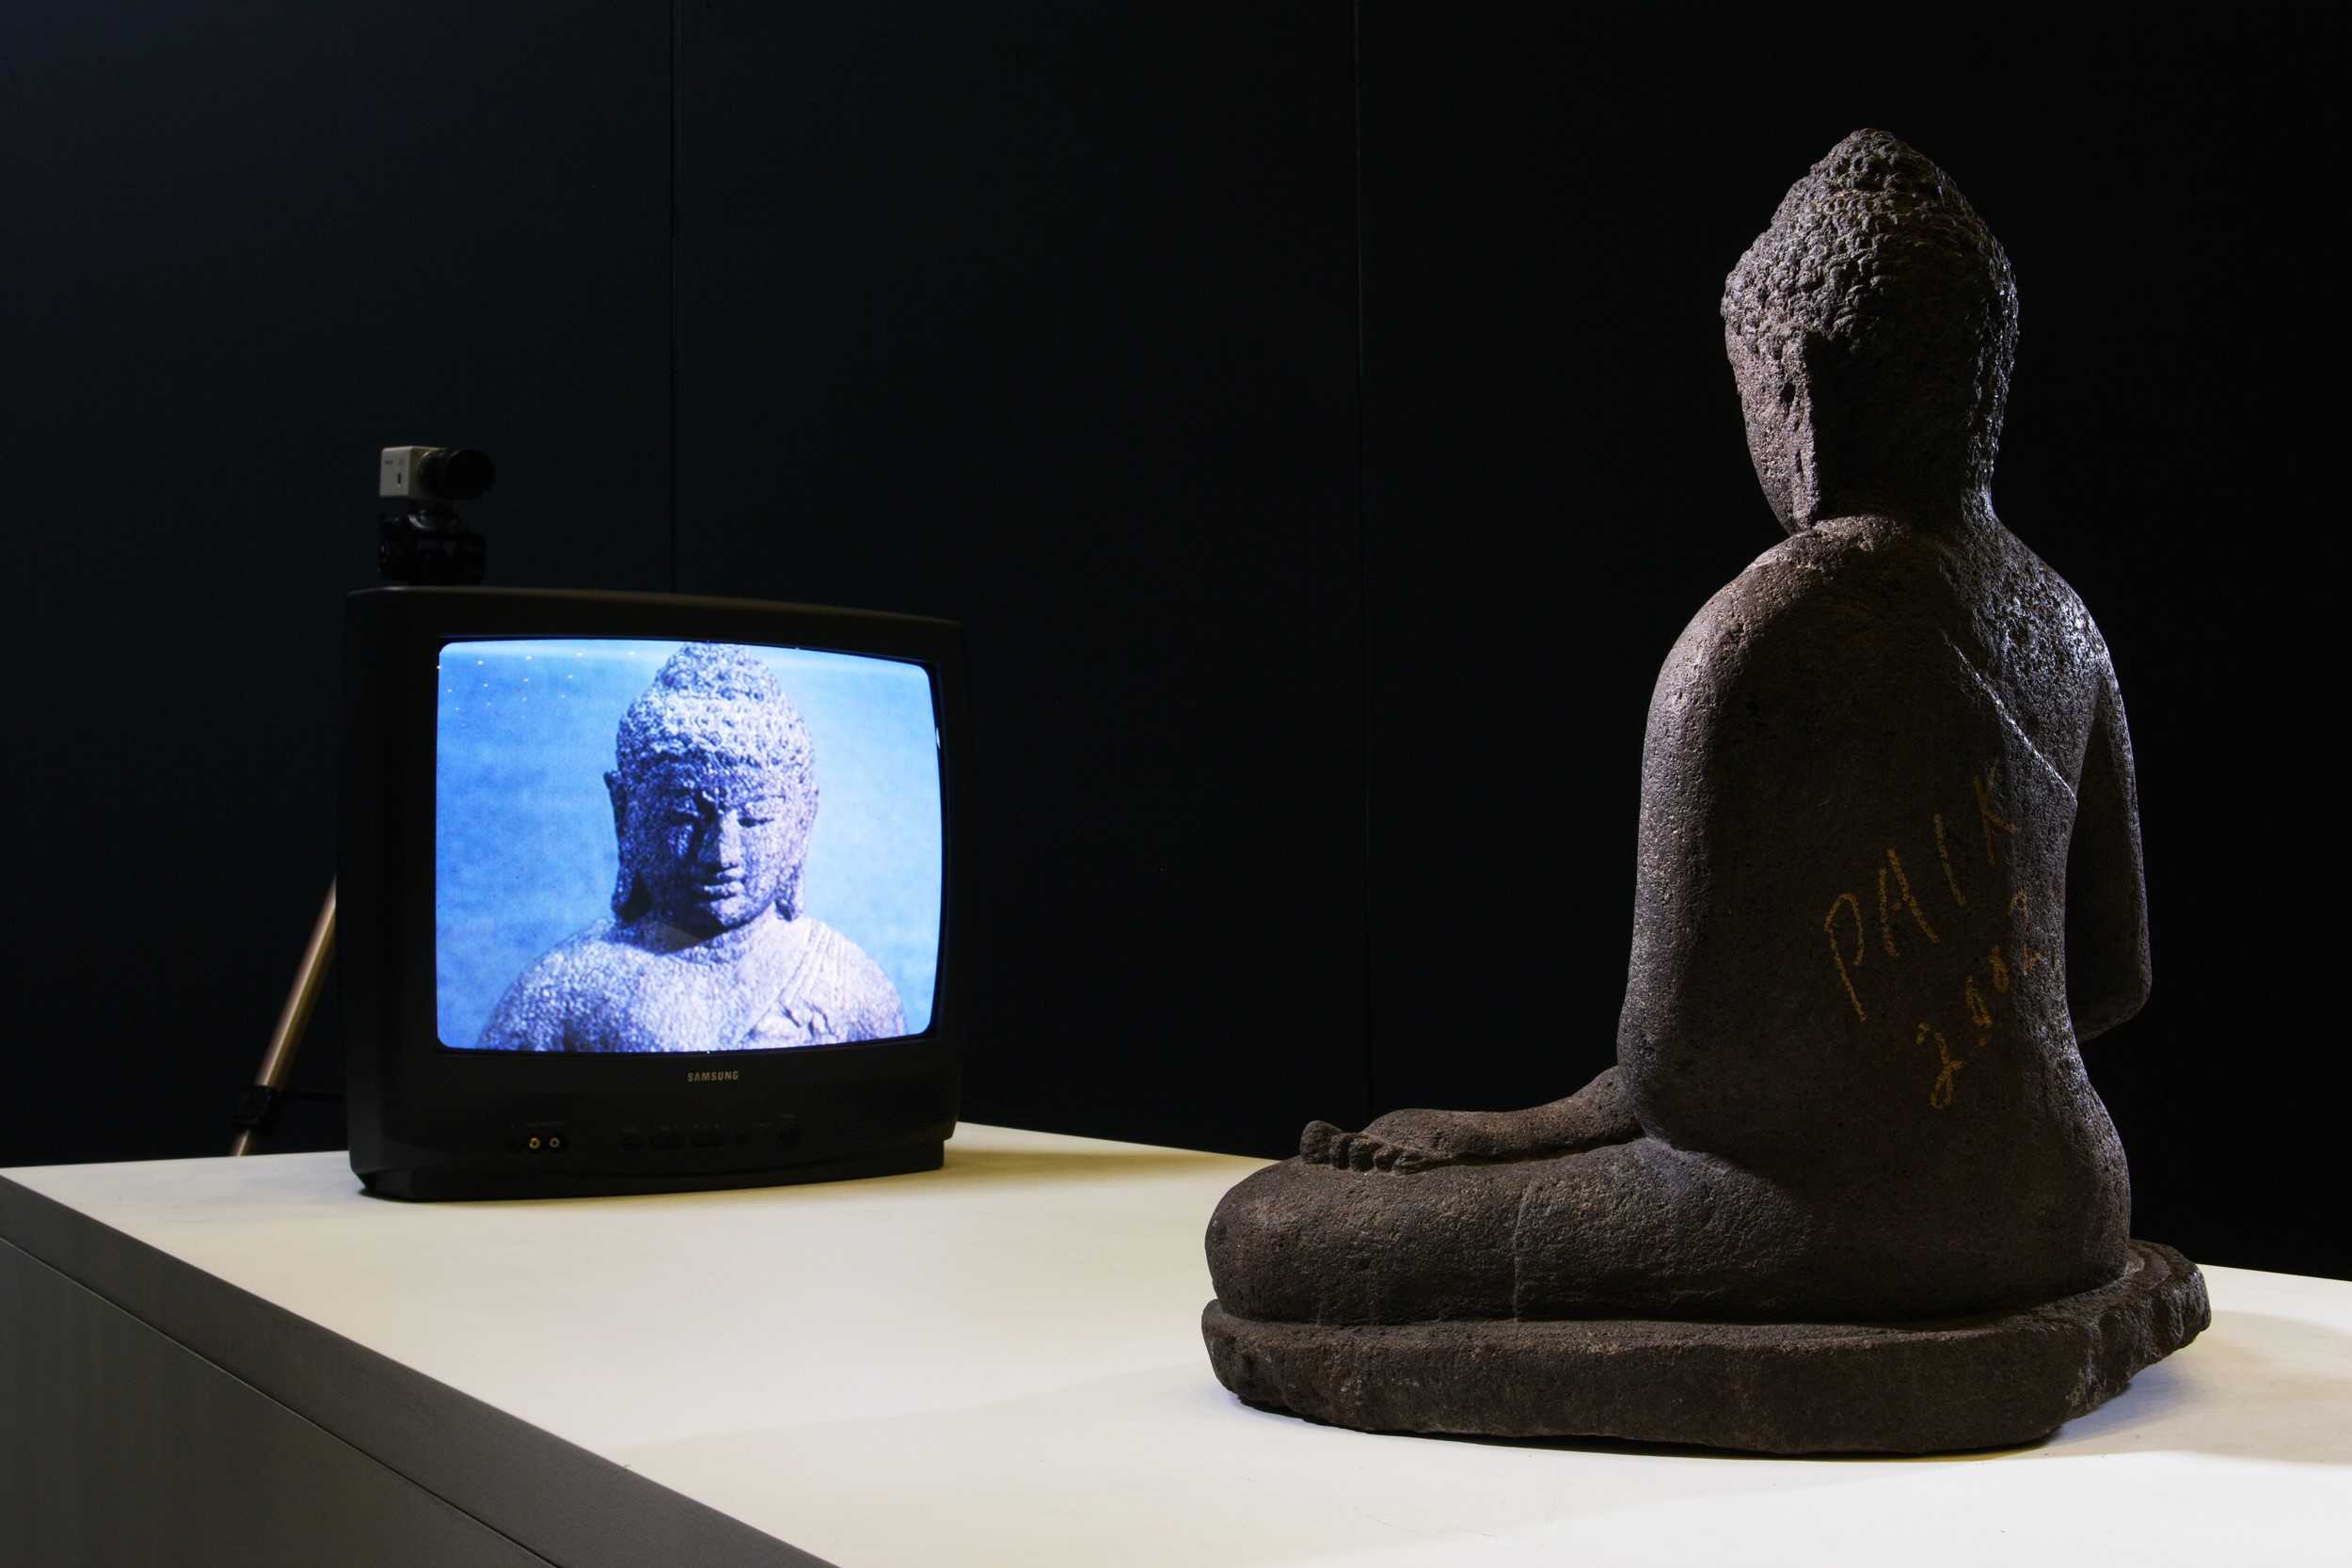 Buddha statue sitting in front of closed circuit television